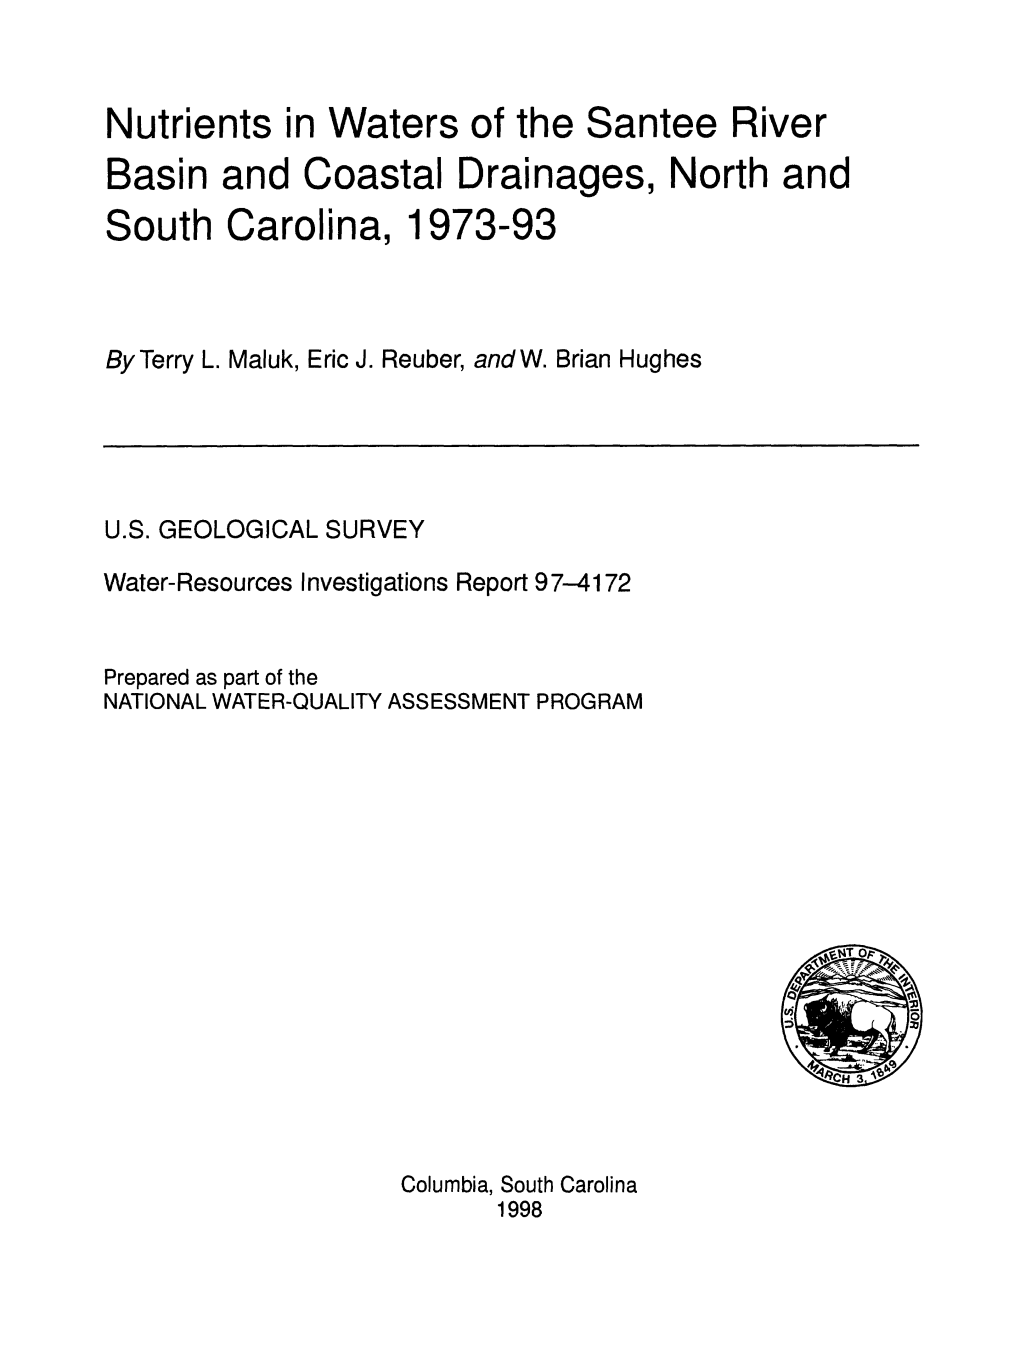 Nutrients in Waters of the Santee River Basin and Coastal Drainages, North and South Carolina, 1973-93